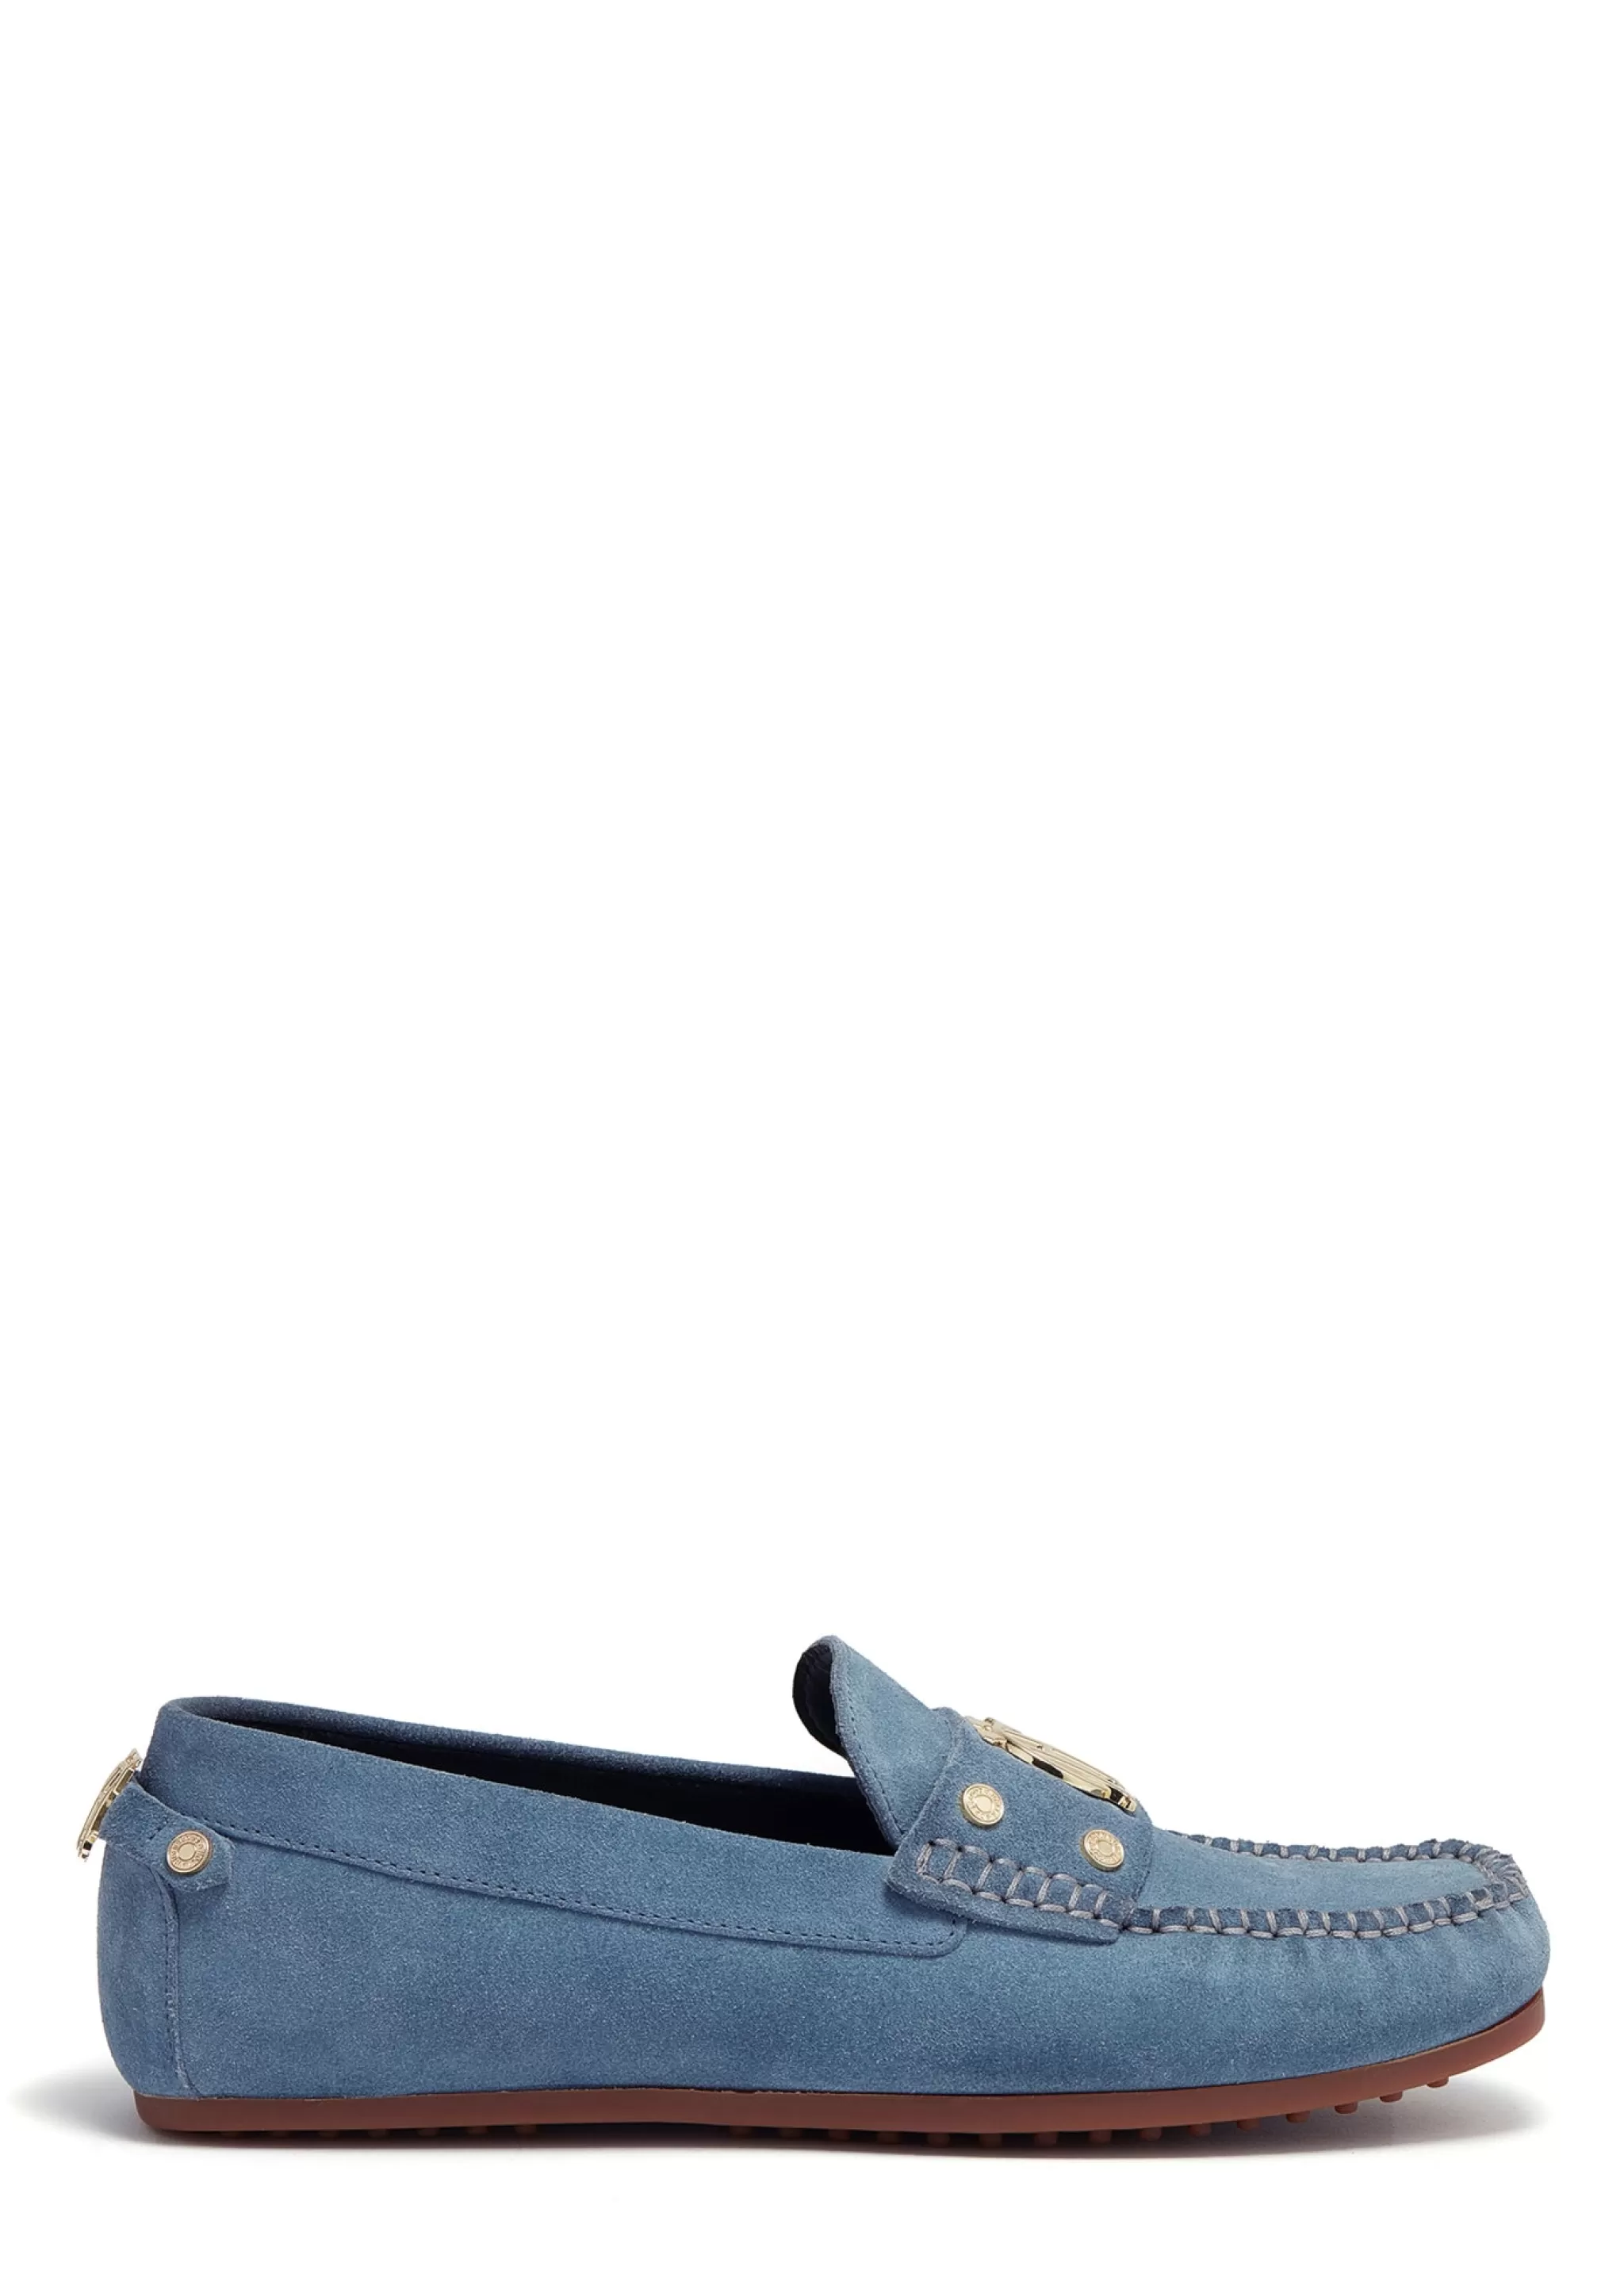 The Driving Loafer>Holland Cooper Online